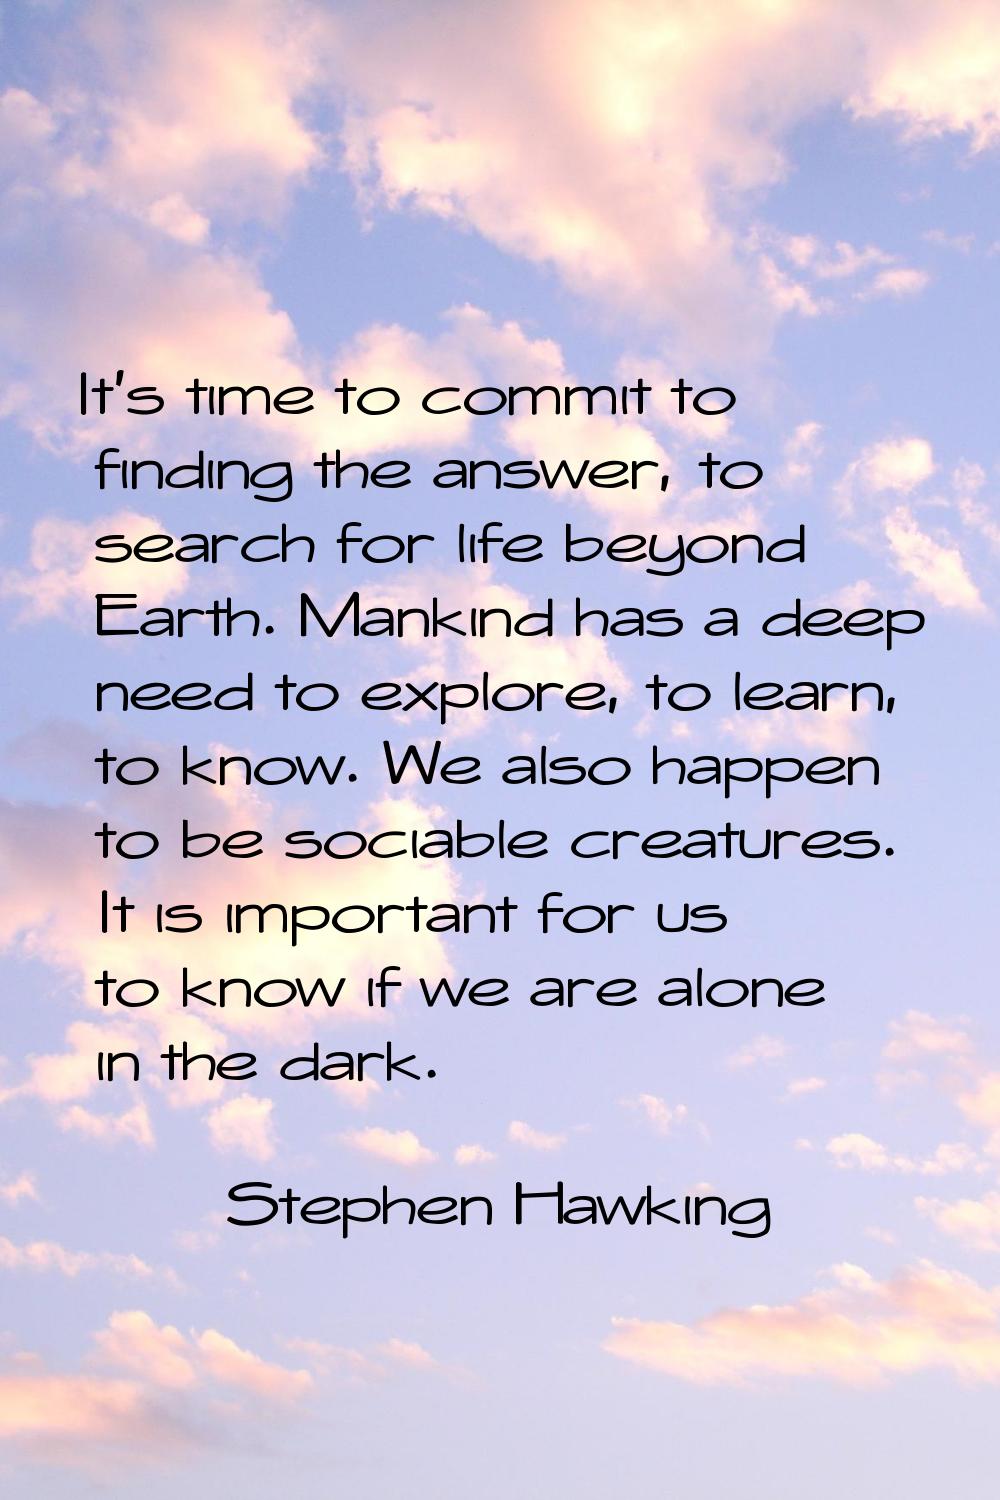 It's time to commit to finding the answer, to search for life beyond Earth. Mankind has a deep need